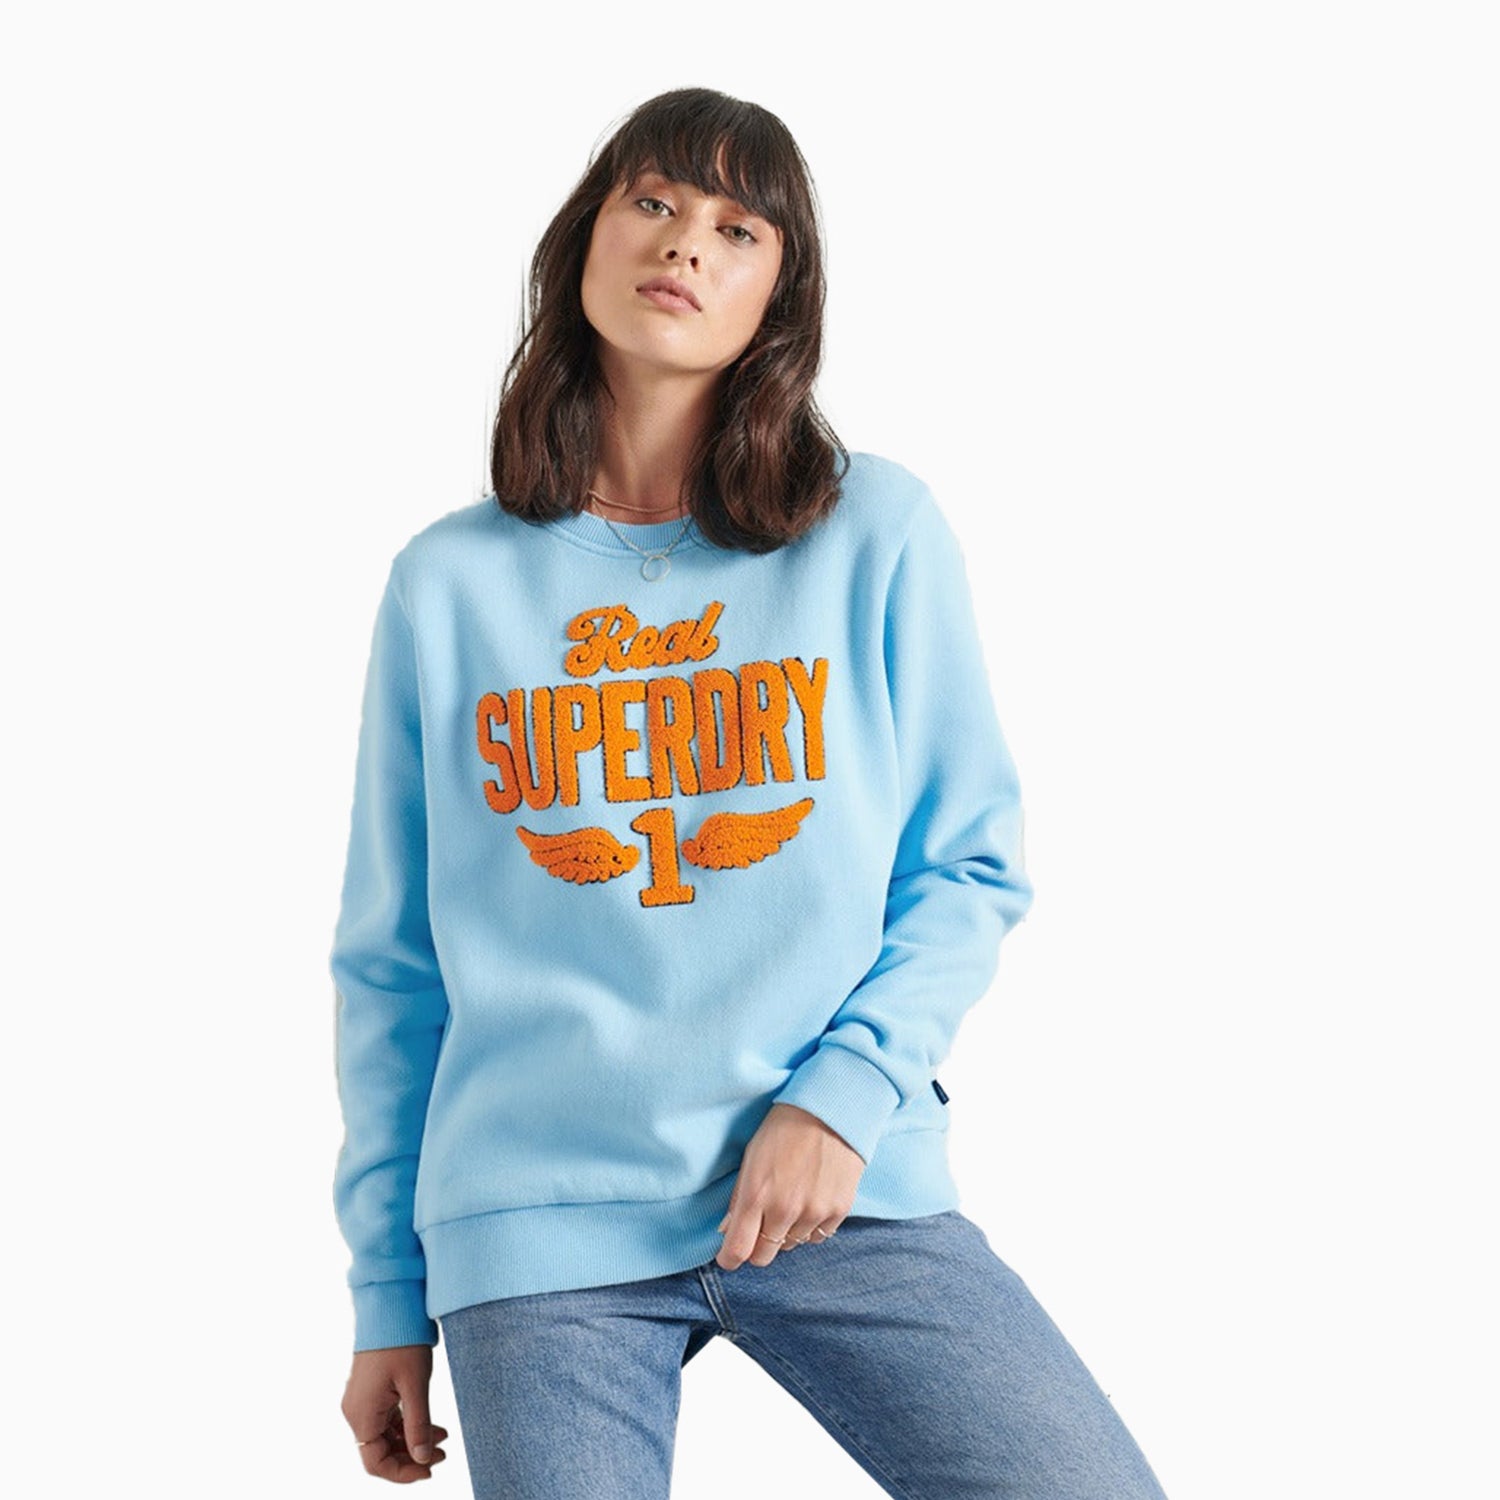 Superdry Women's Stone Wash Graphic Sweatshirt - Color: Royal - Tops and Bottoms USA -